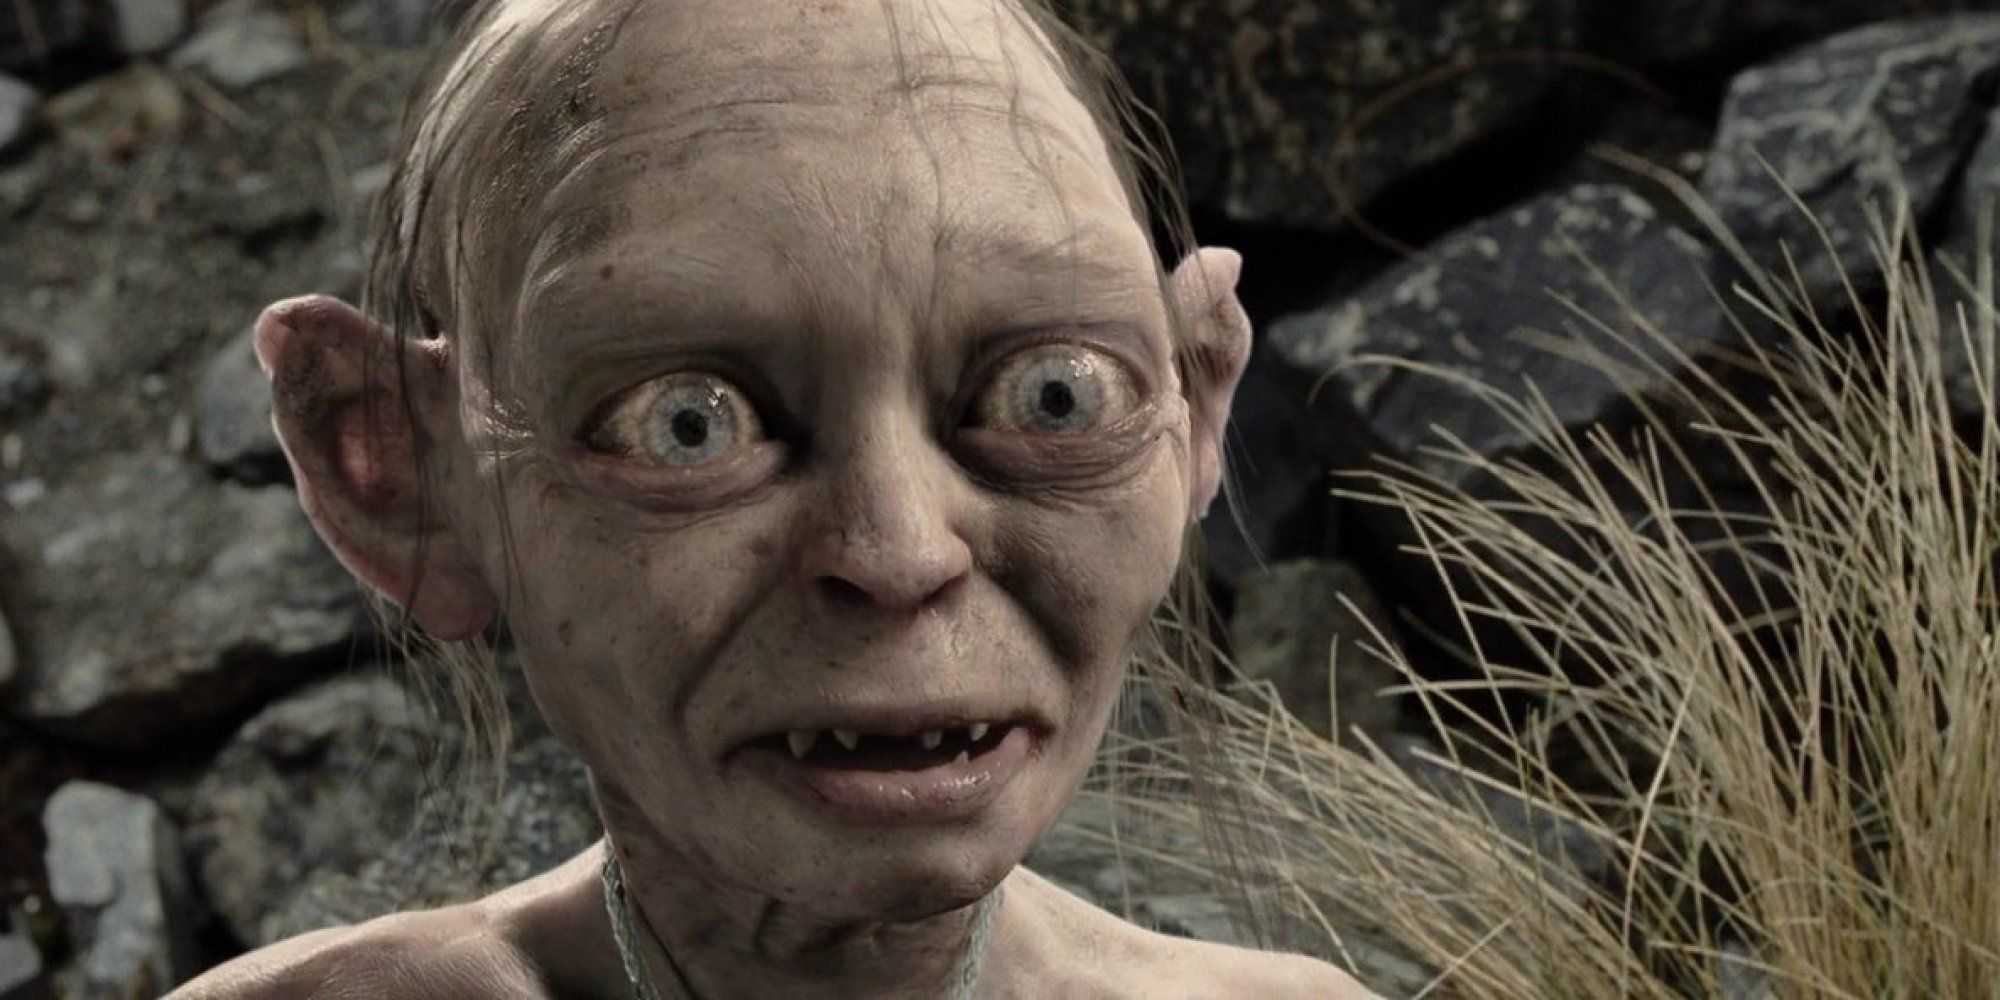 Gollum looking surprised in The Lord of the Rings.